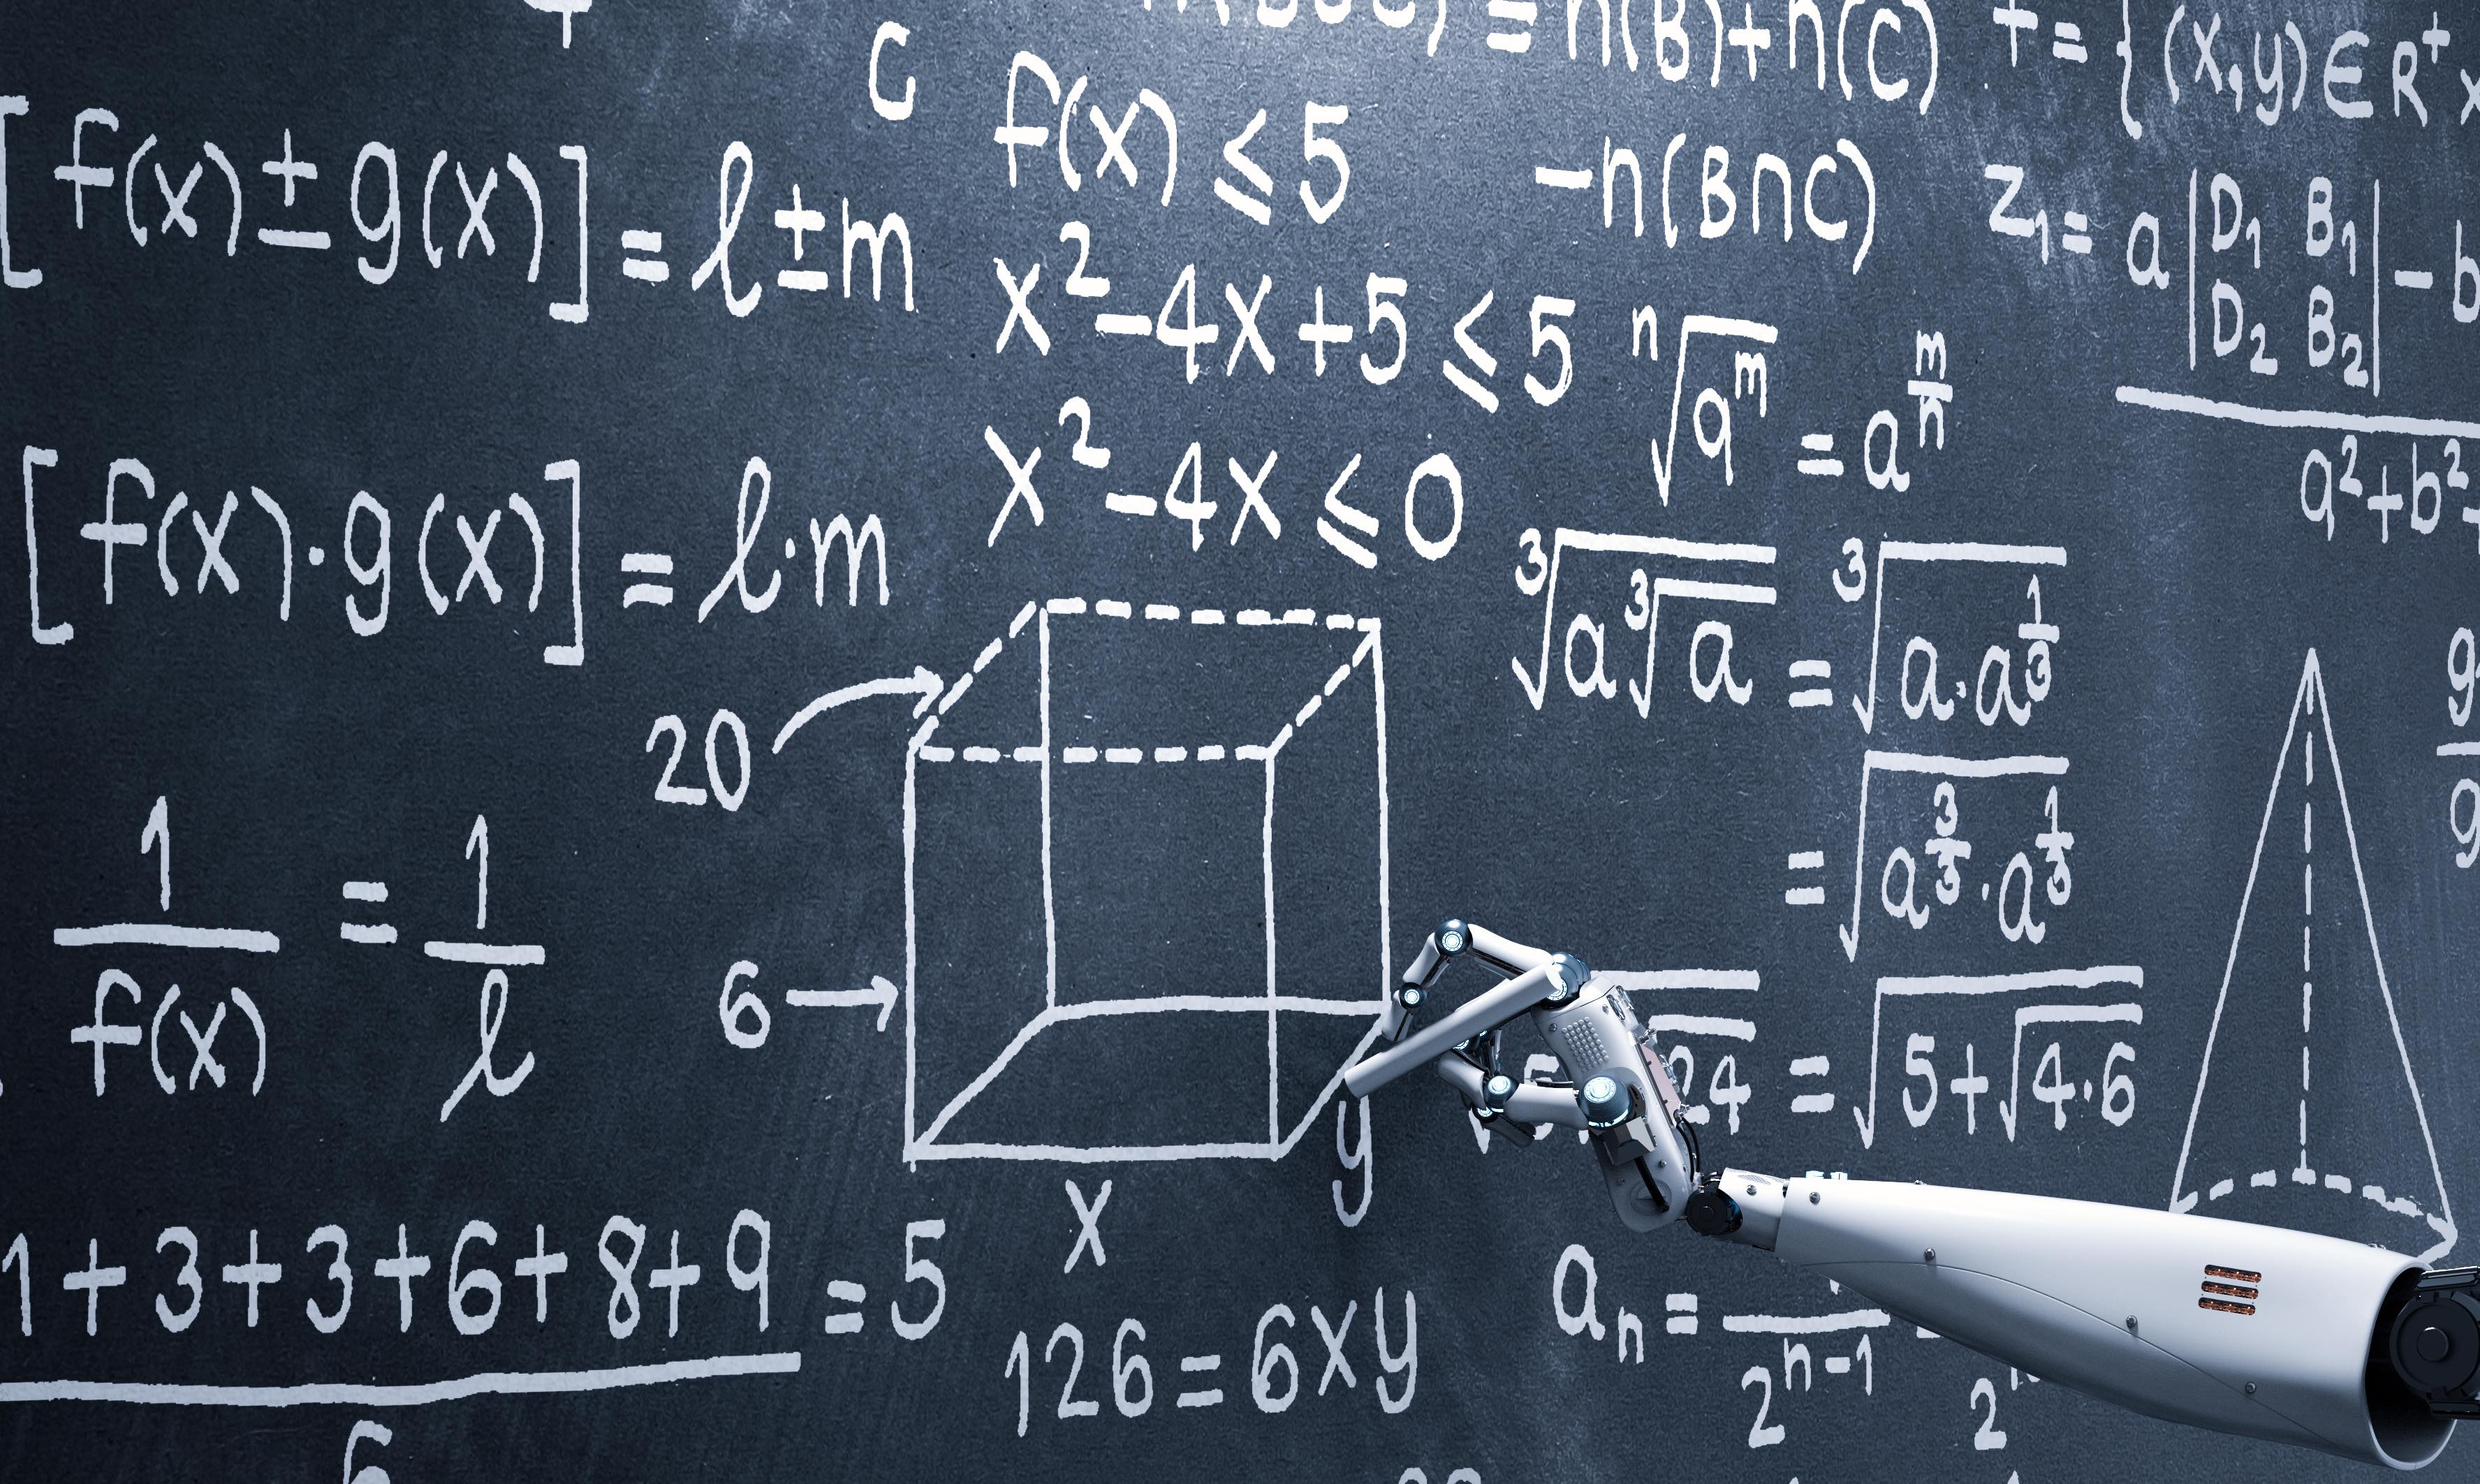 robot arm writes equations on a chalkboard